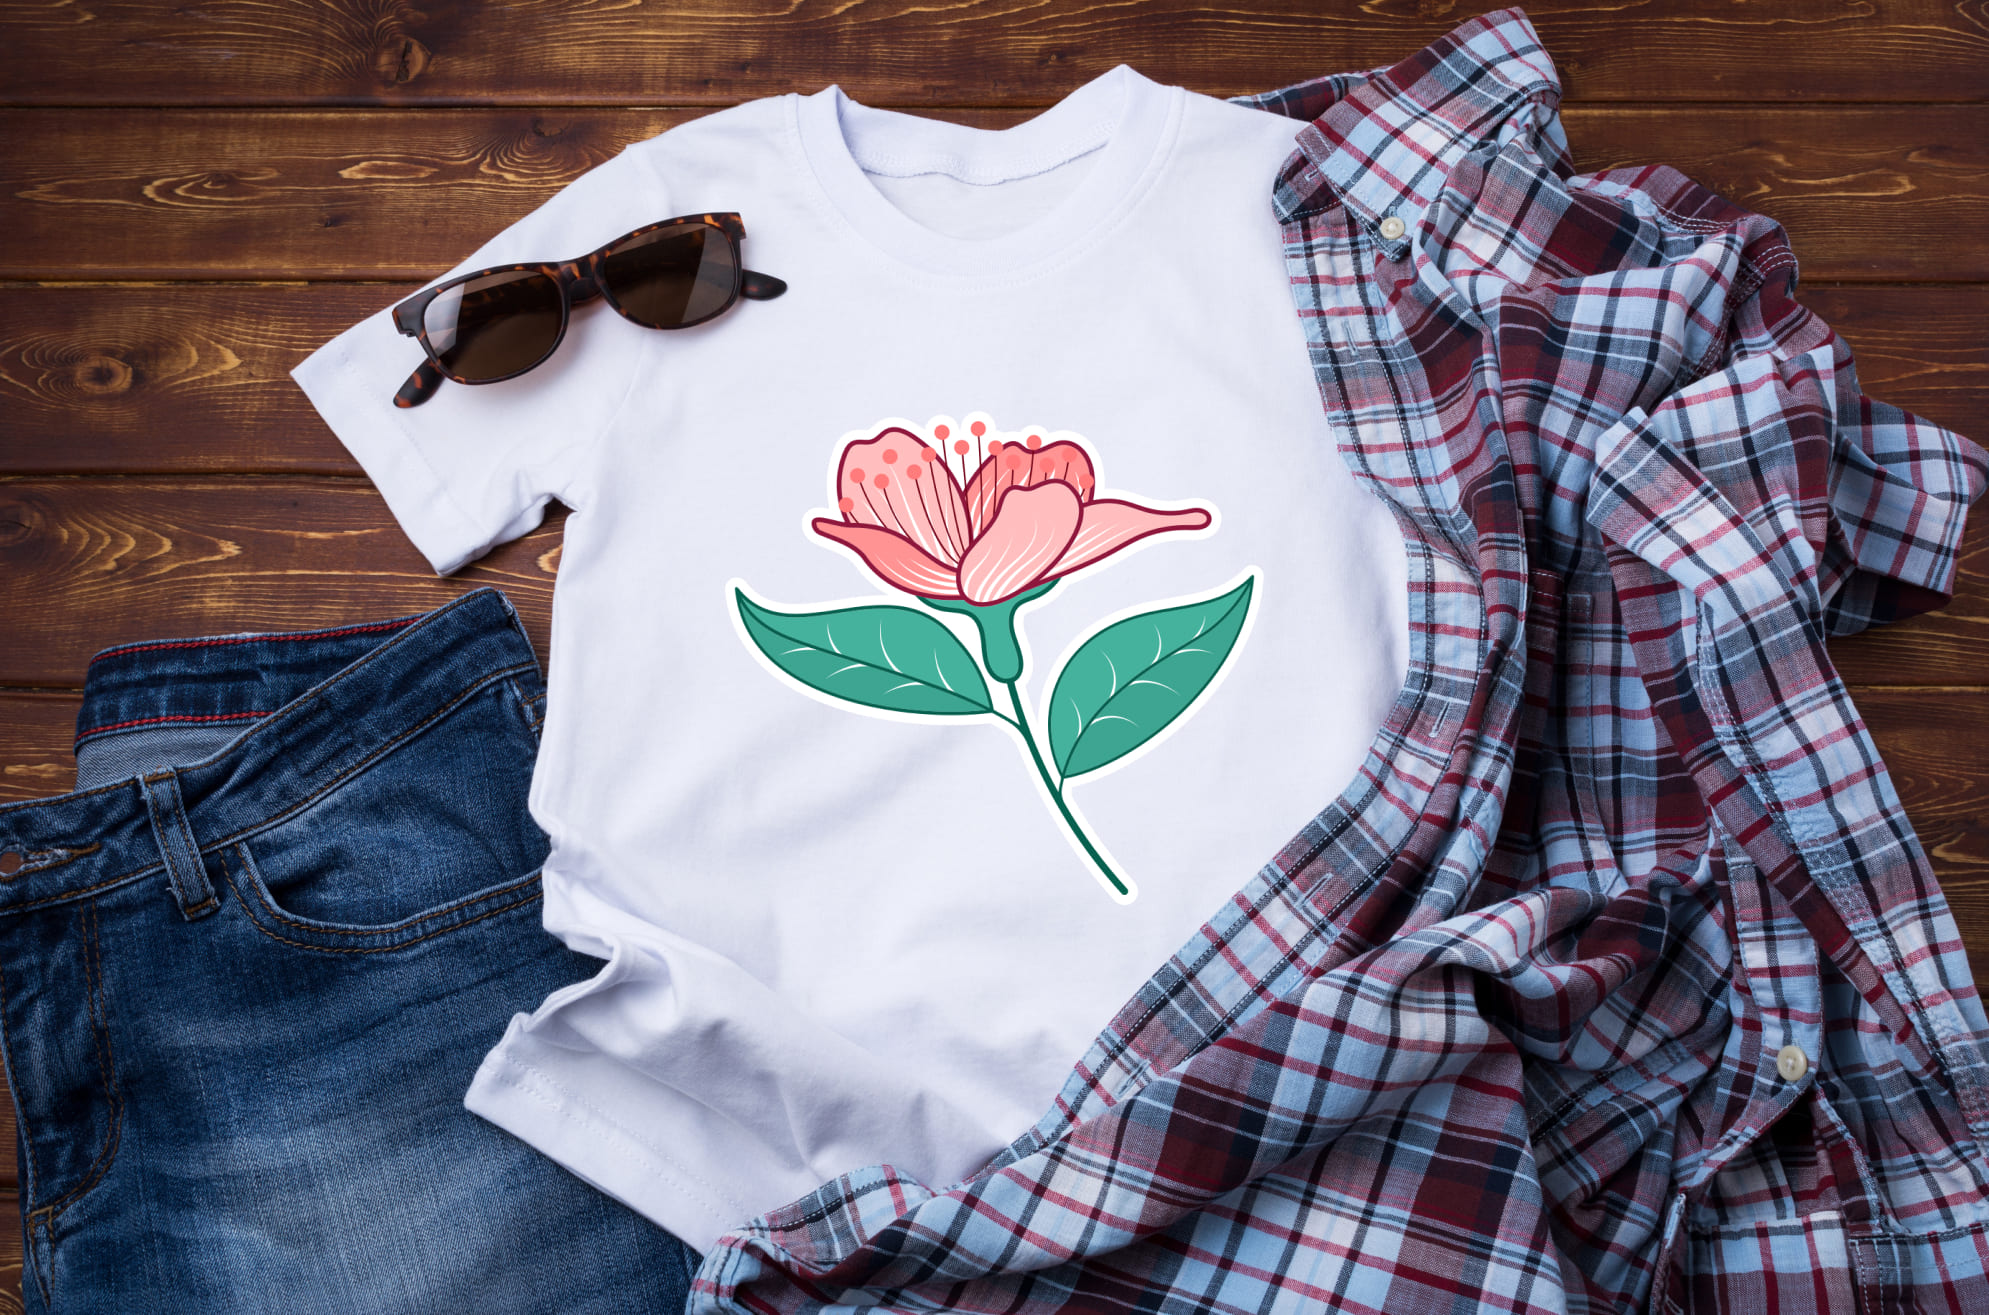 The image of a flower on clothes.